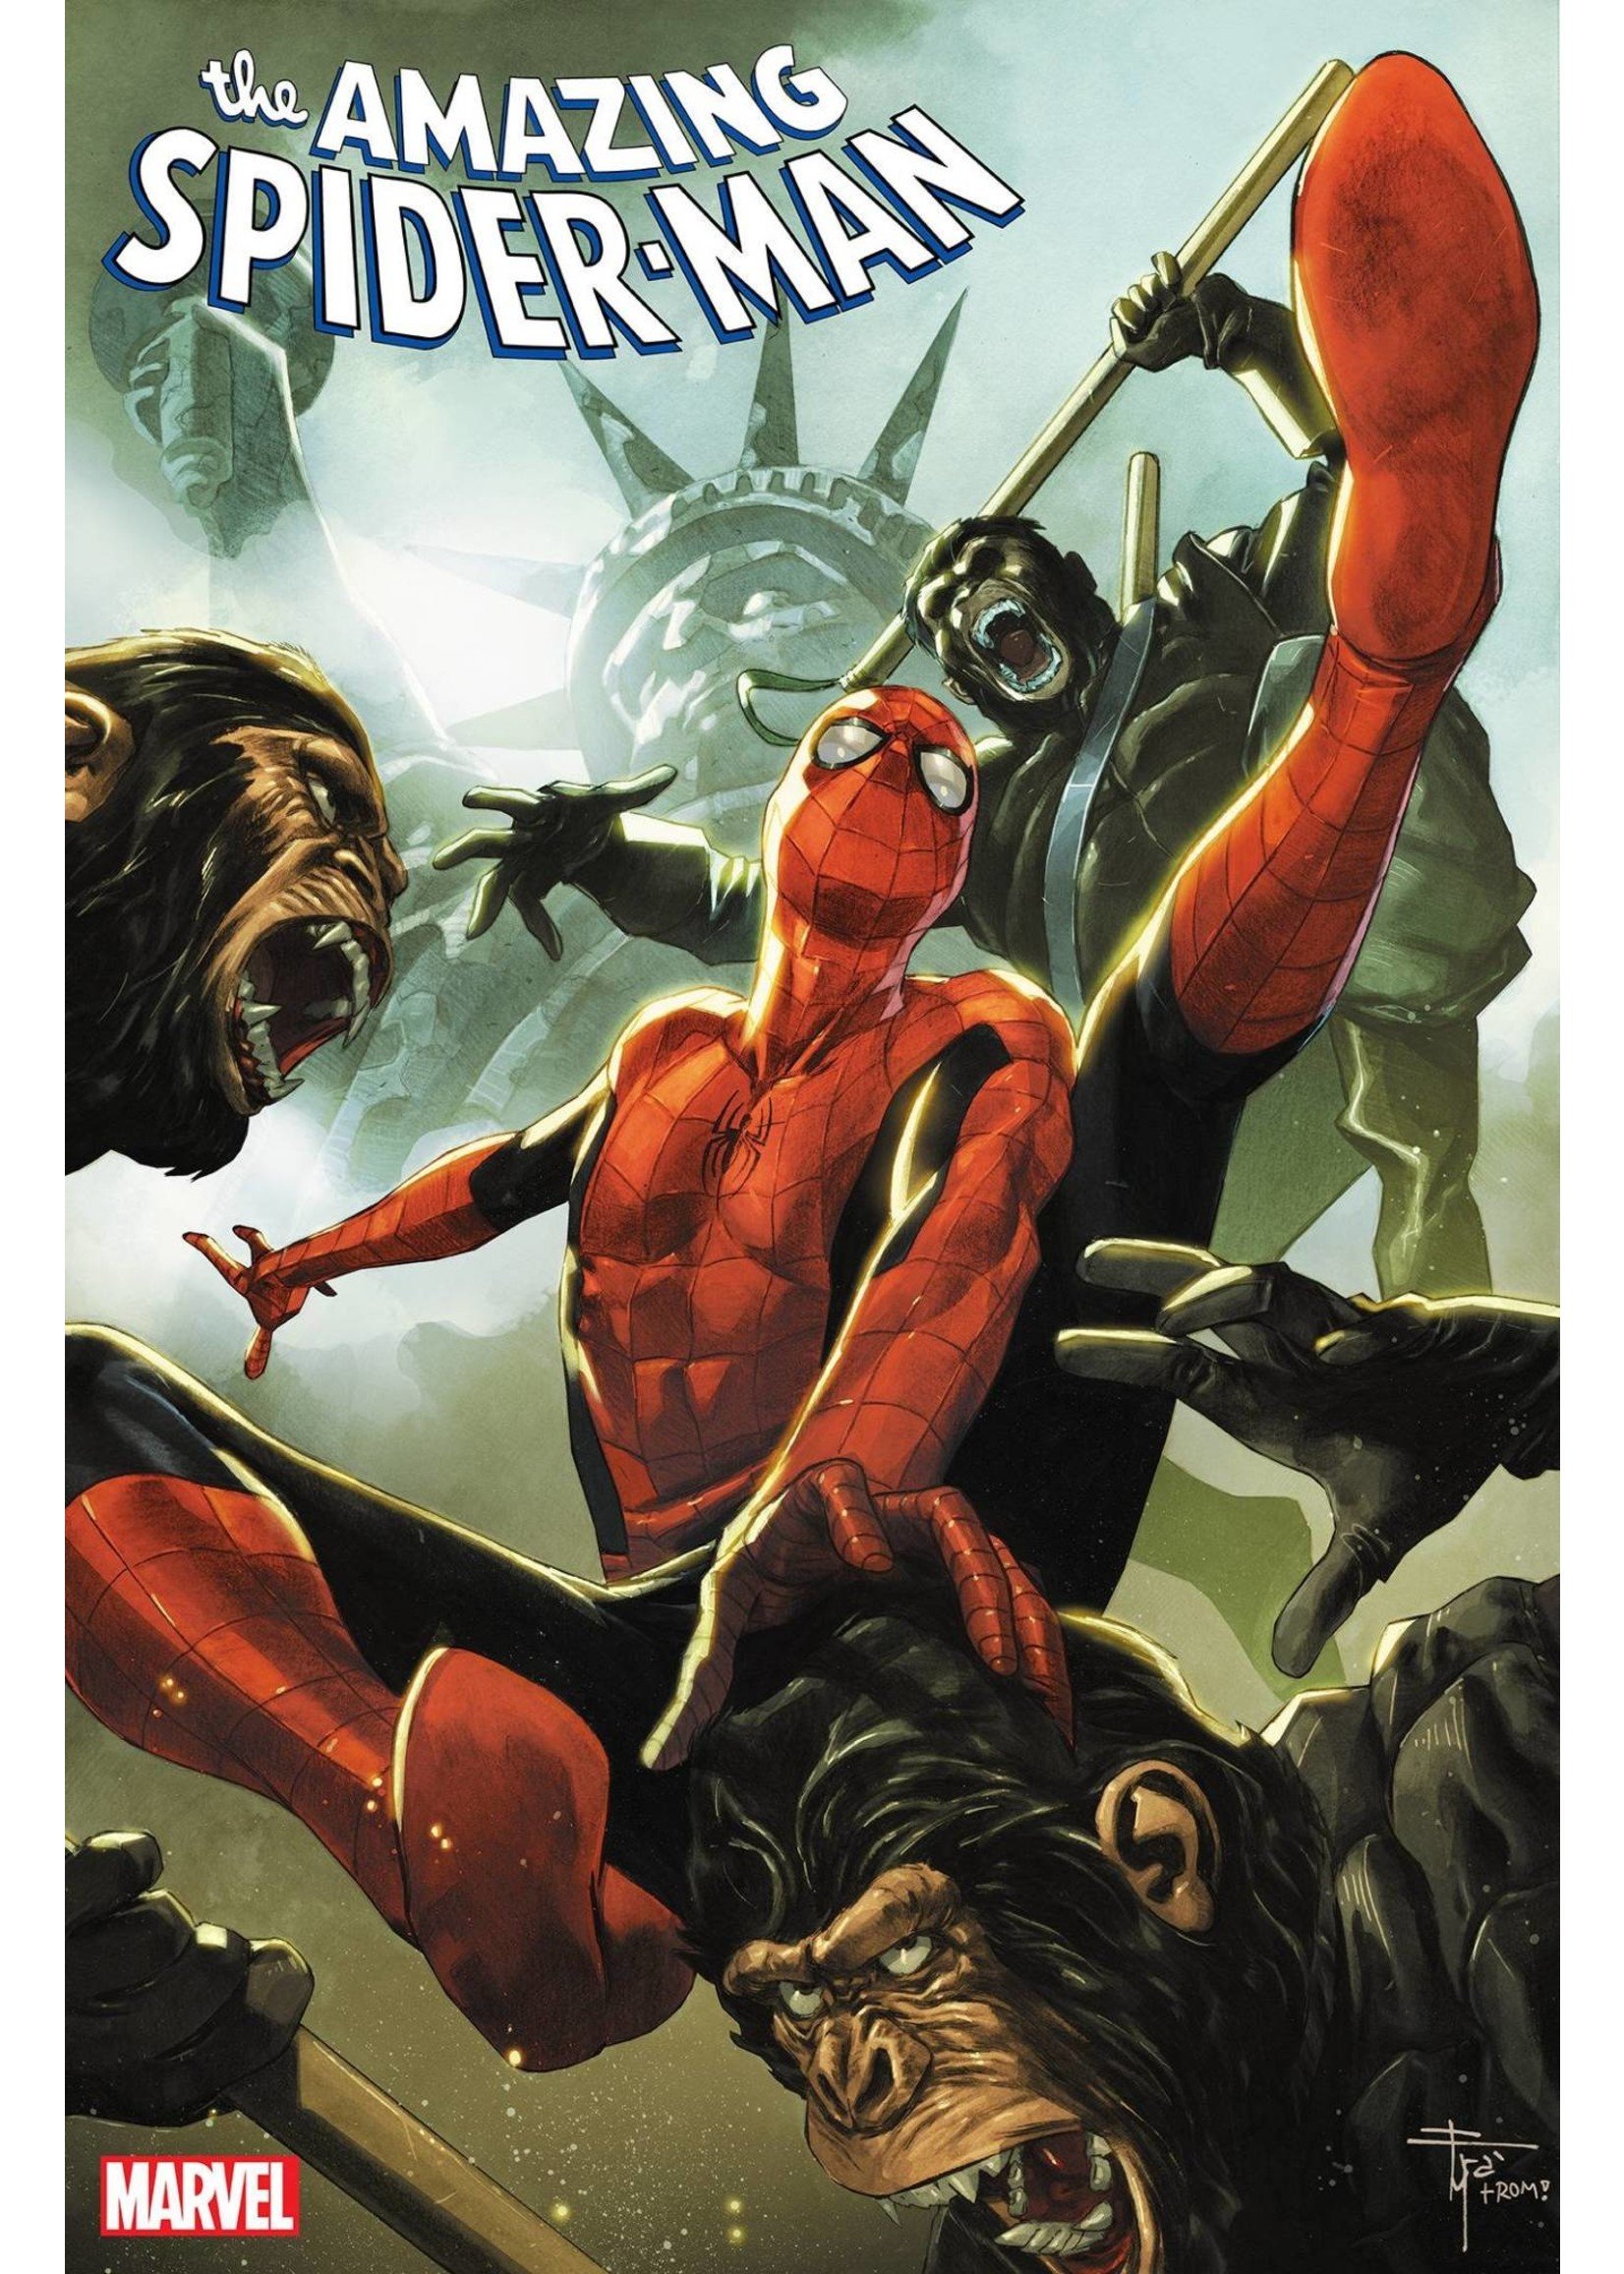 MARVEL COMICS AMAZING SPIDER-MAN (2022) #19 MOBILI PLANET OF THE APES